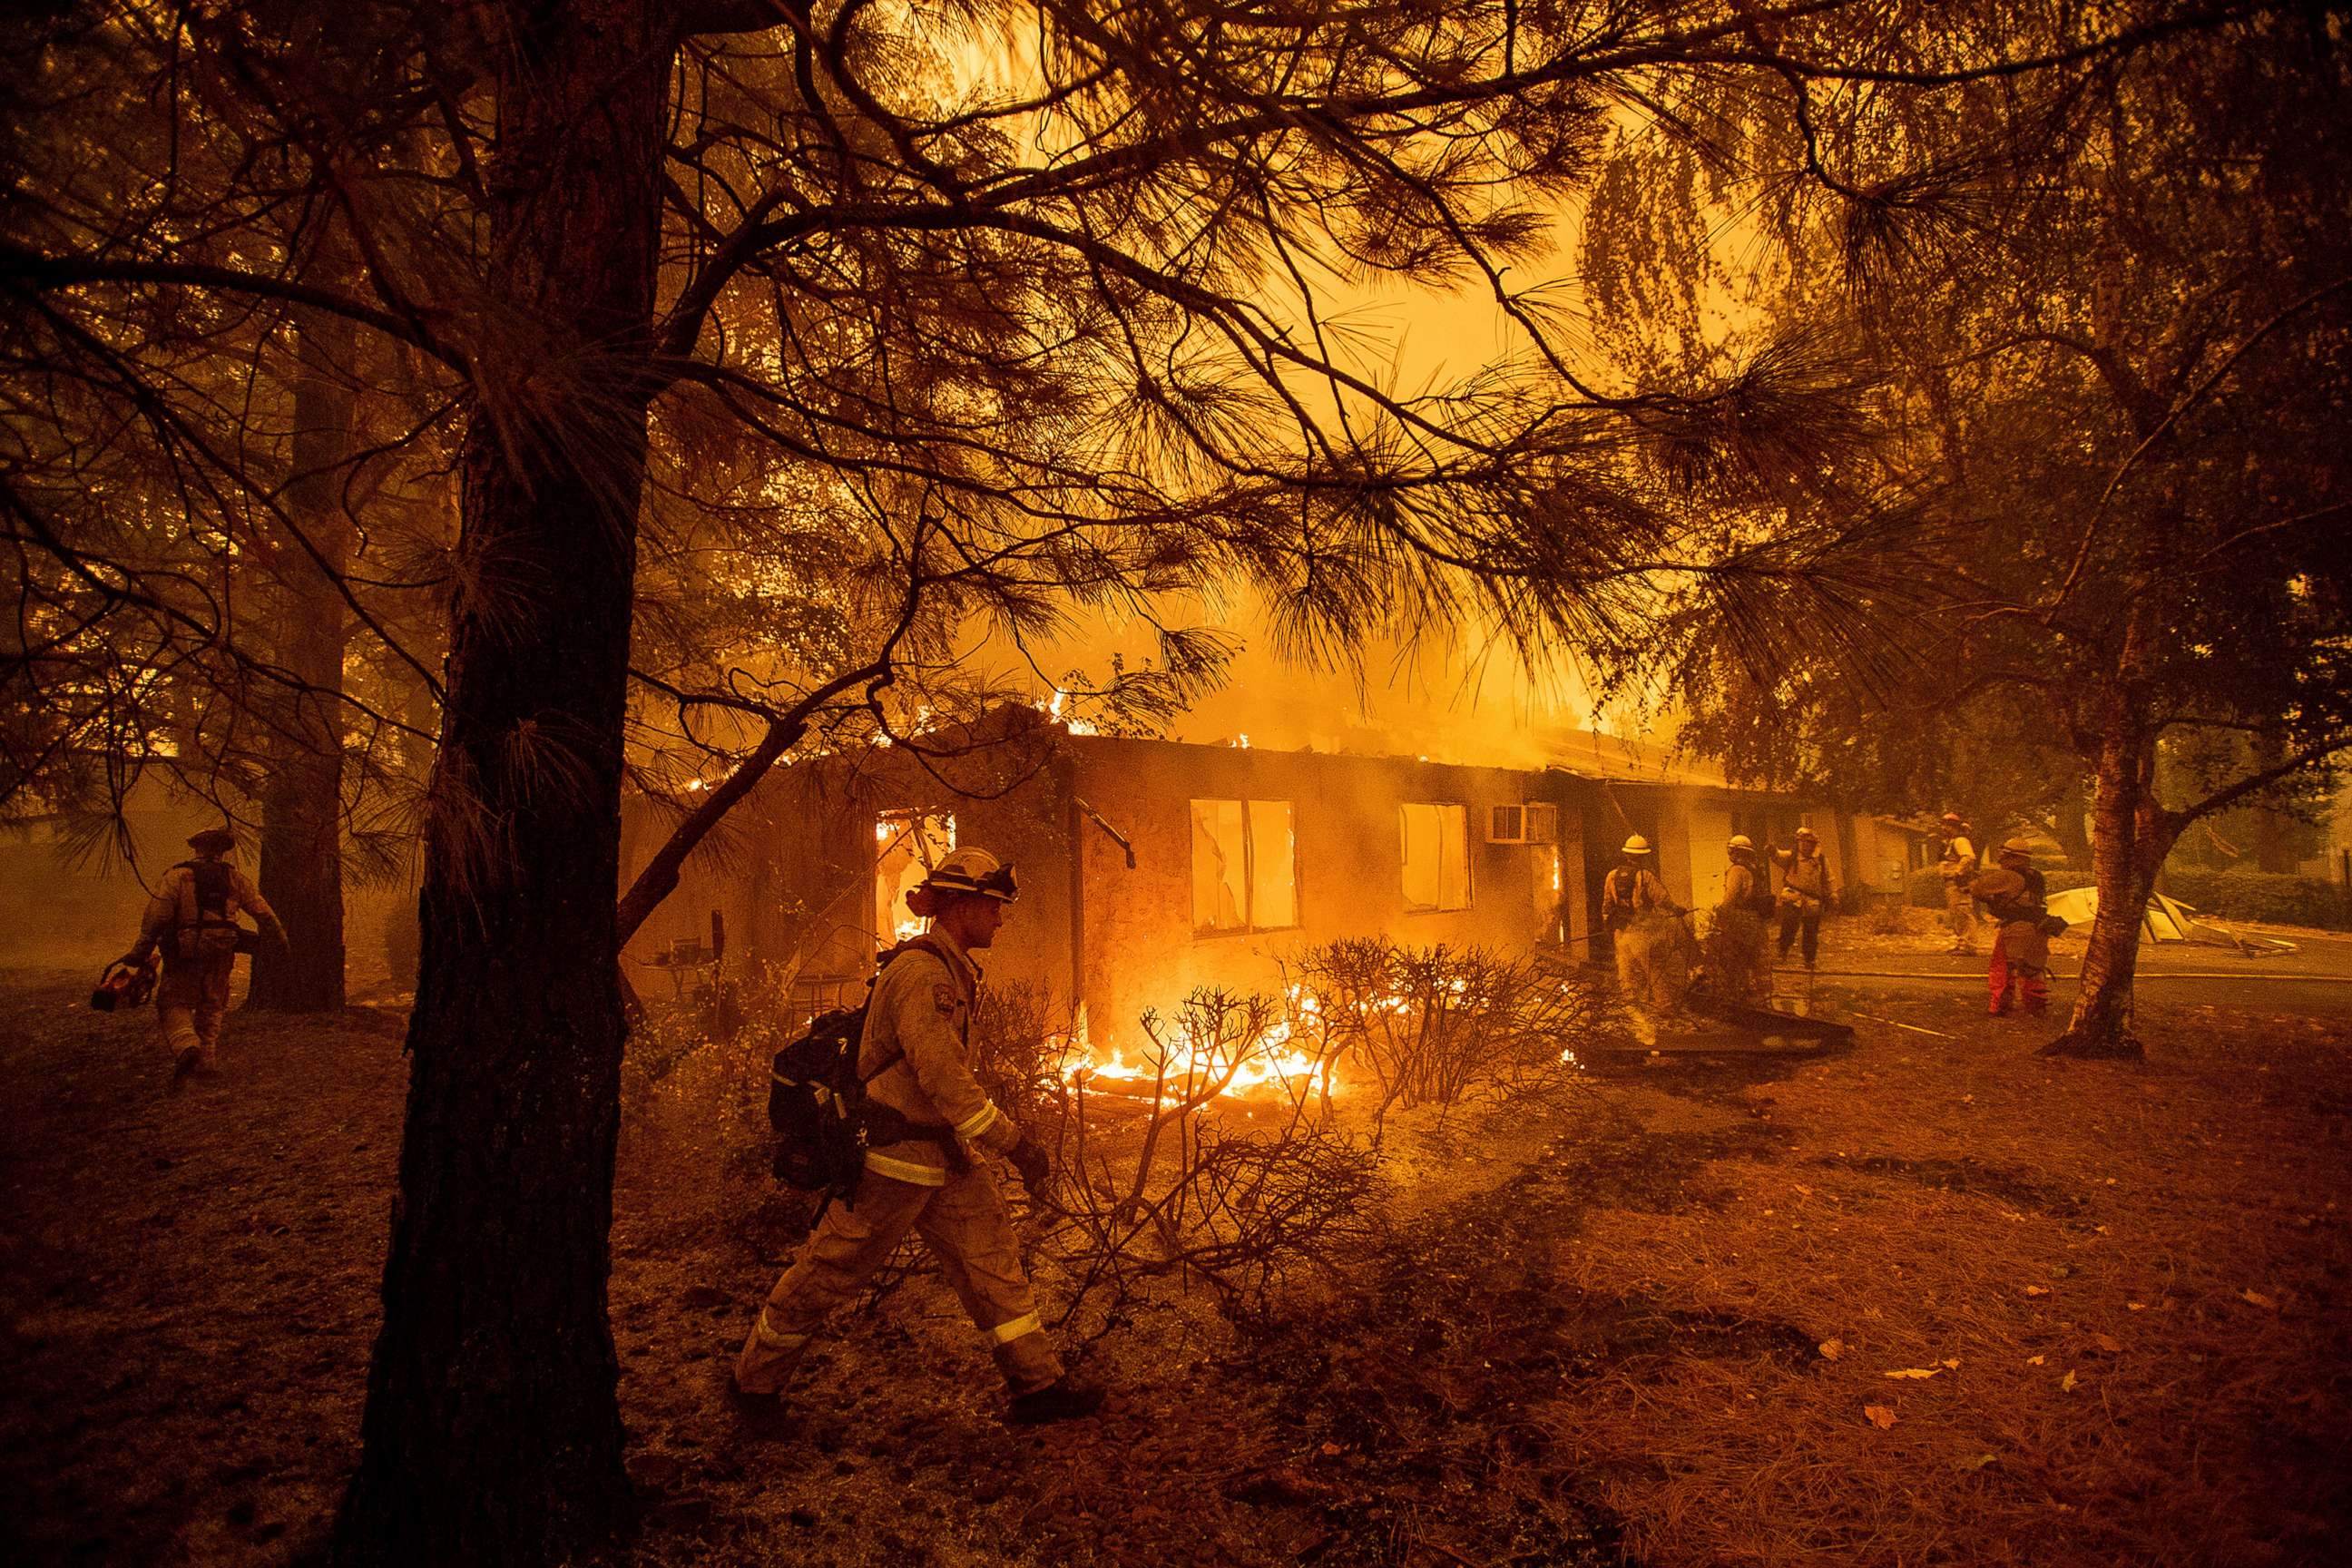 PHOTO: Firefighters work to keep flames from spreading through the Shadowbrook apartment complex as a wildfire burns through Paradise, Calif., Nov. 9, 2018.